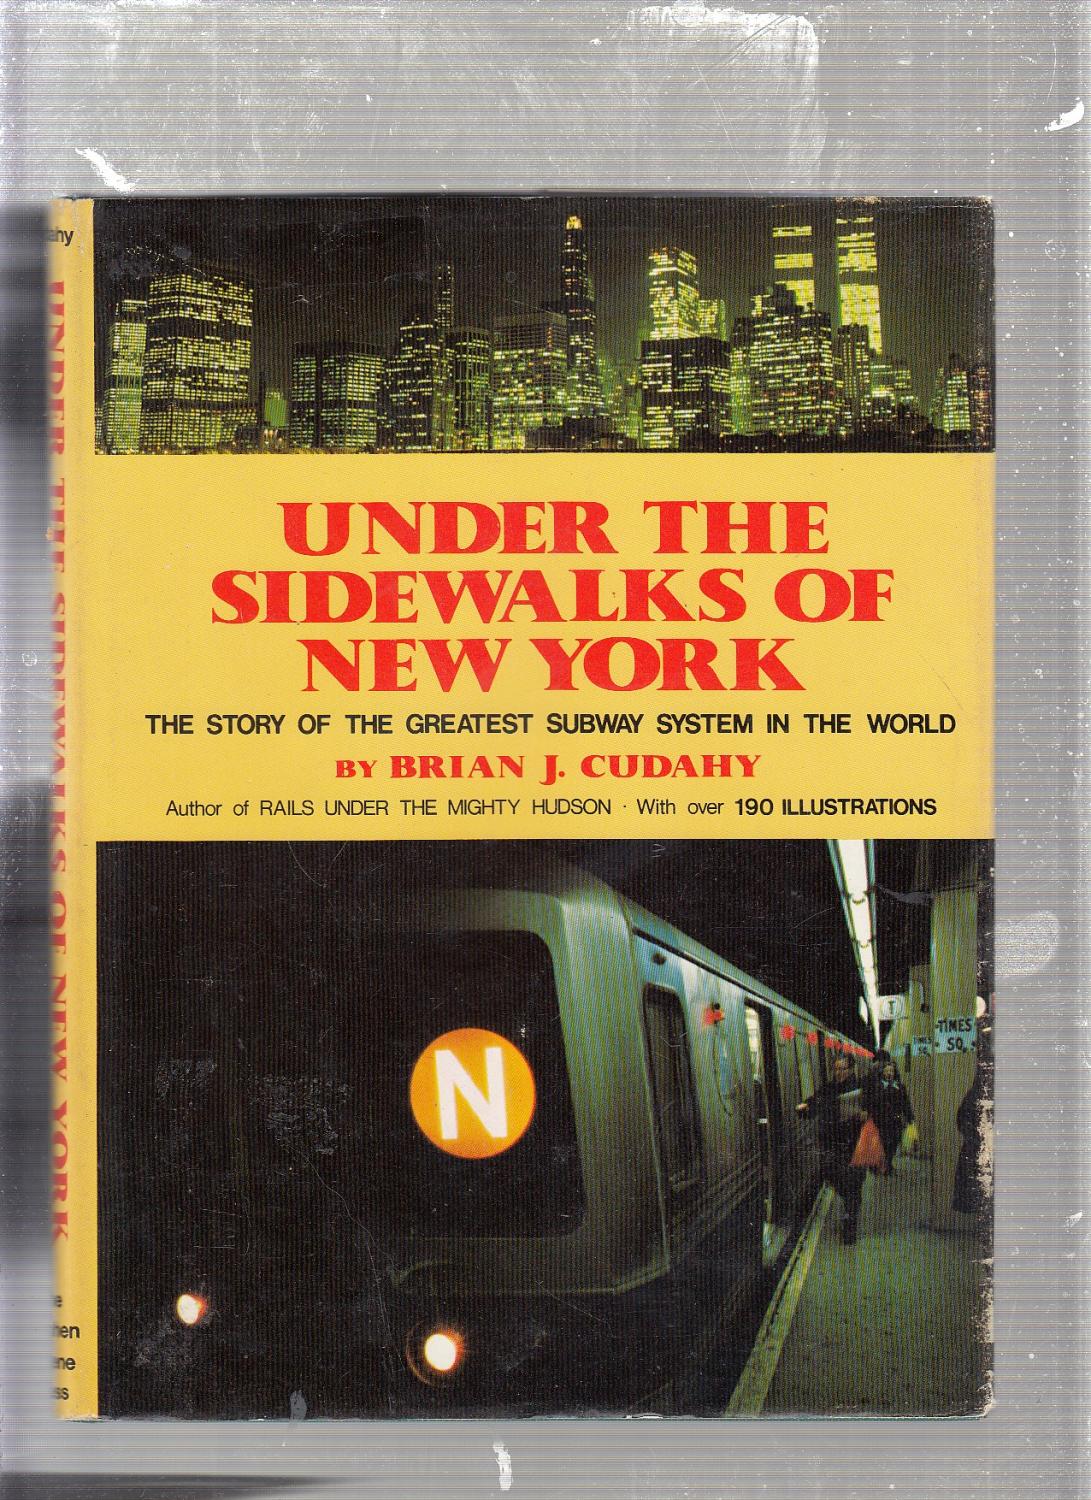 Under the Sidewalks of New York: The Story of the Greatest Subway System in the World - Brian J. Cudahy